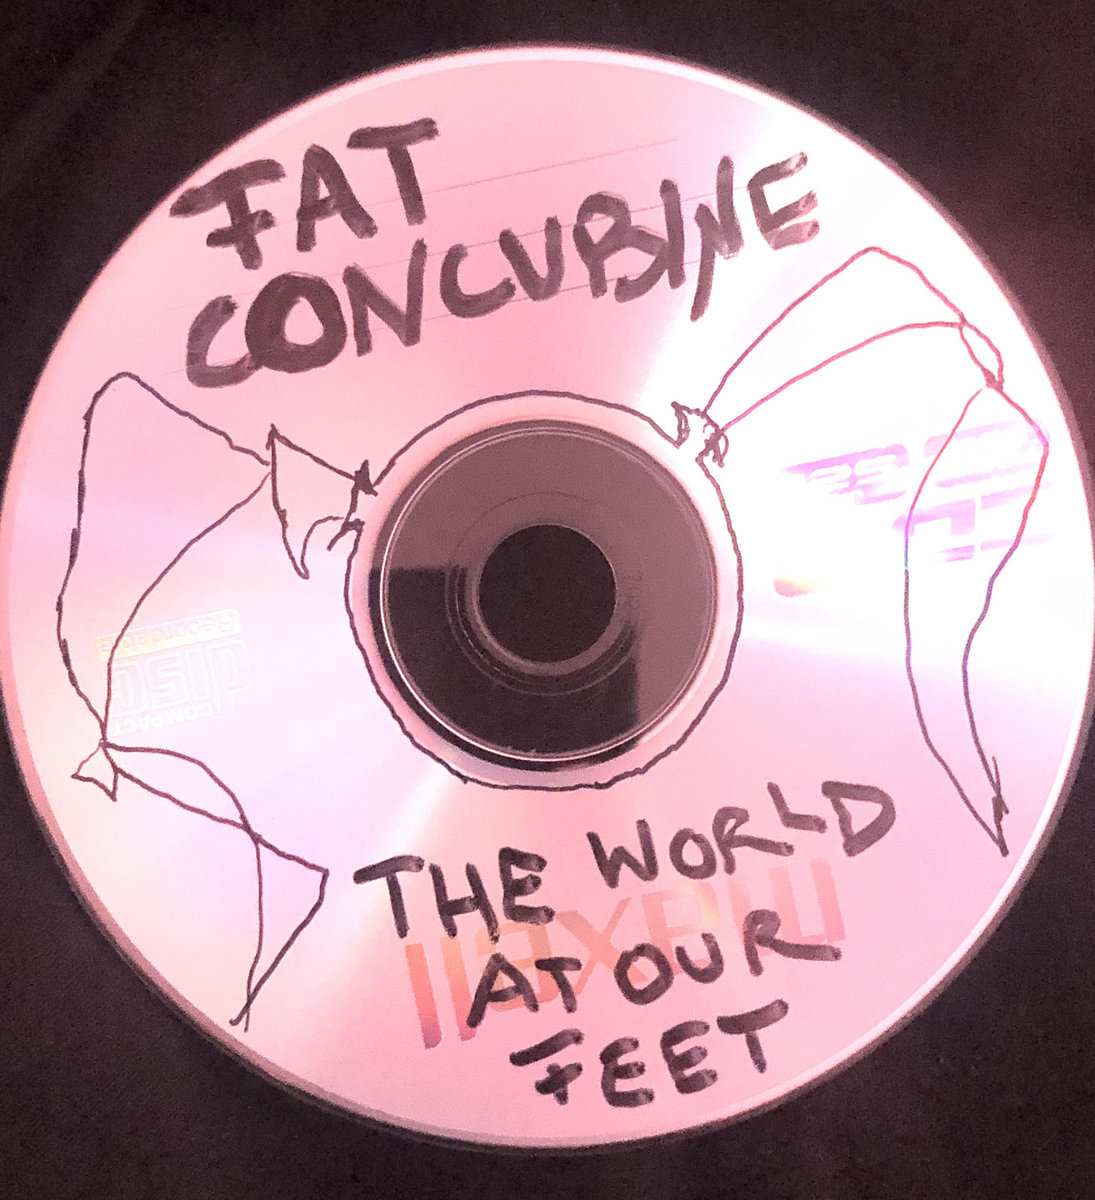 FAT CONCUBINE – THE WORLD AT OUR FEET